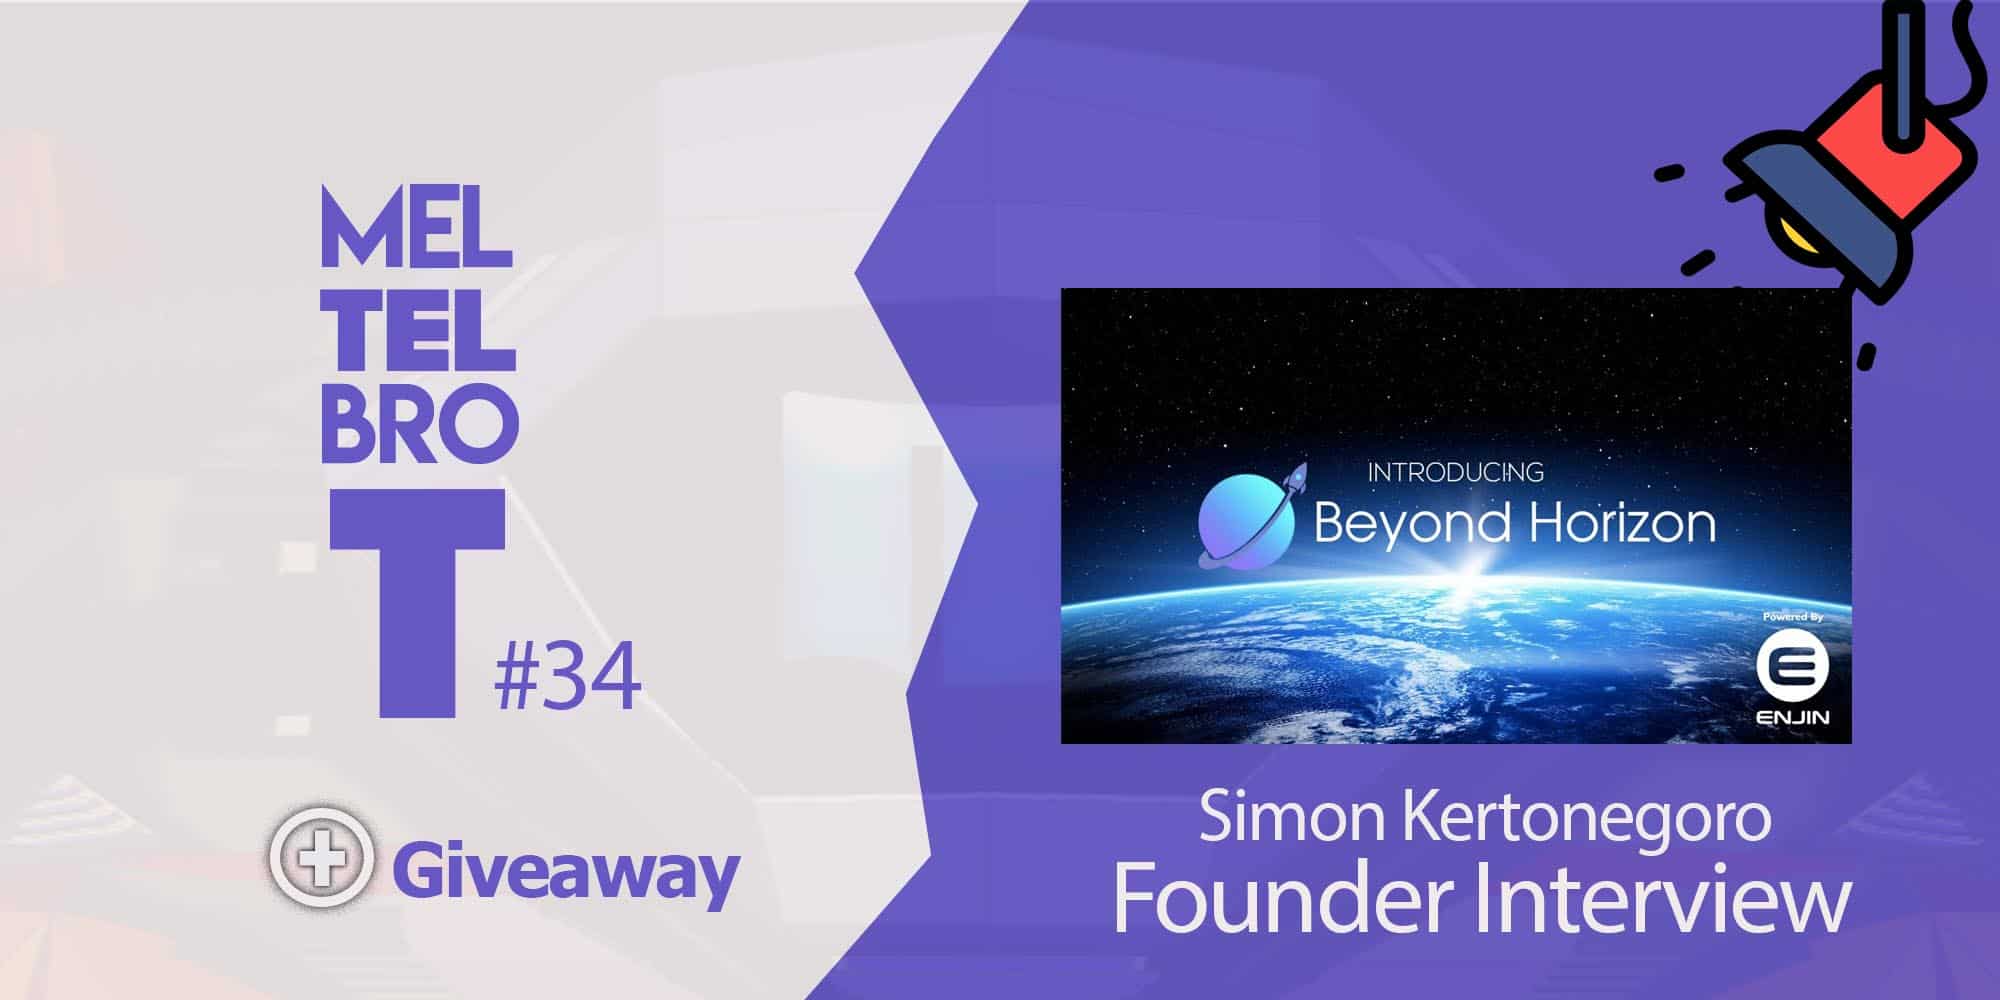 BLUE WHITE 21 MELTELBROT beyondhorizon 34 Today, I’m chatting with well-known community stalwart and still Enjin Marketing advisor - Simon Kertonegoro. Recently, Simon took a step away from working for Enjin as VP of Marketing, to concentrate on Enjin adoption as CEO for the new platform – Beyond Horizon.